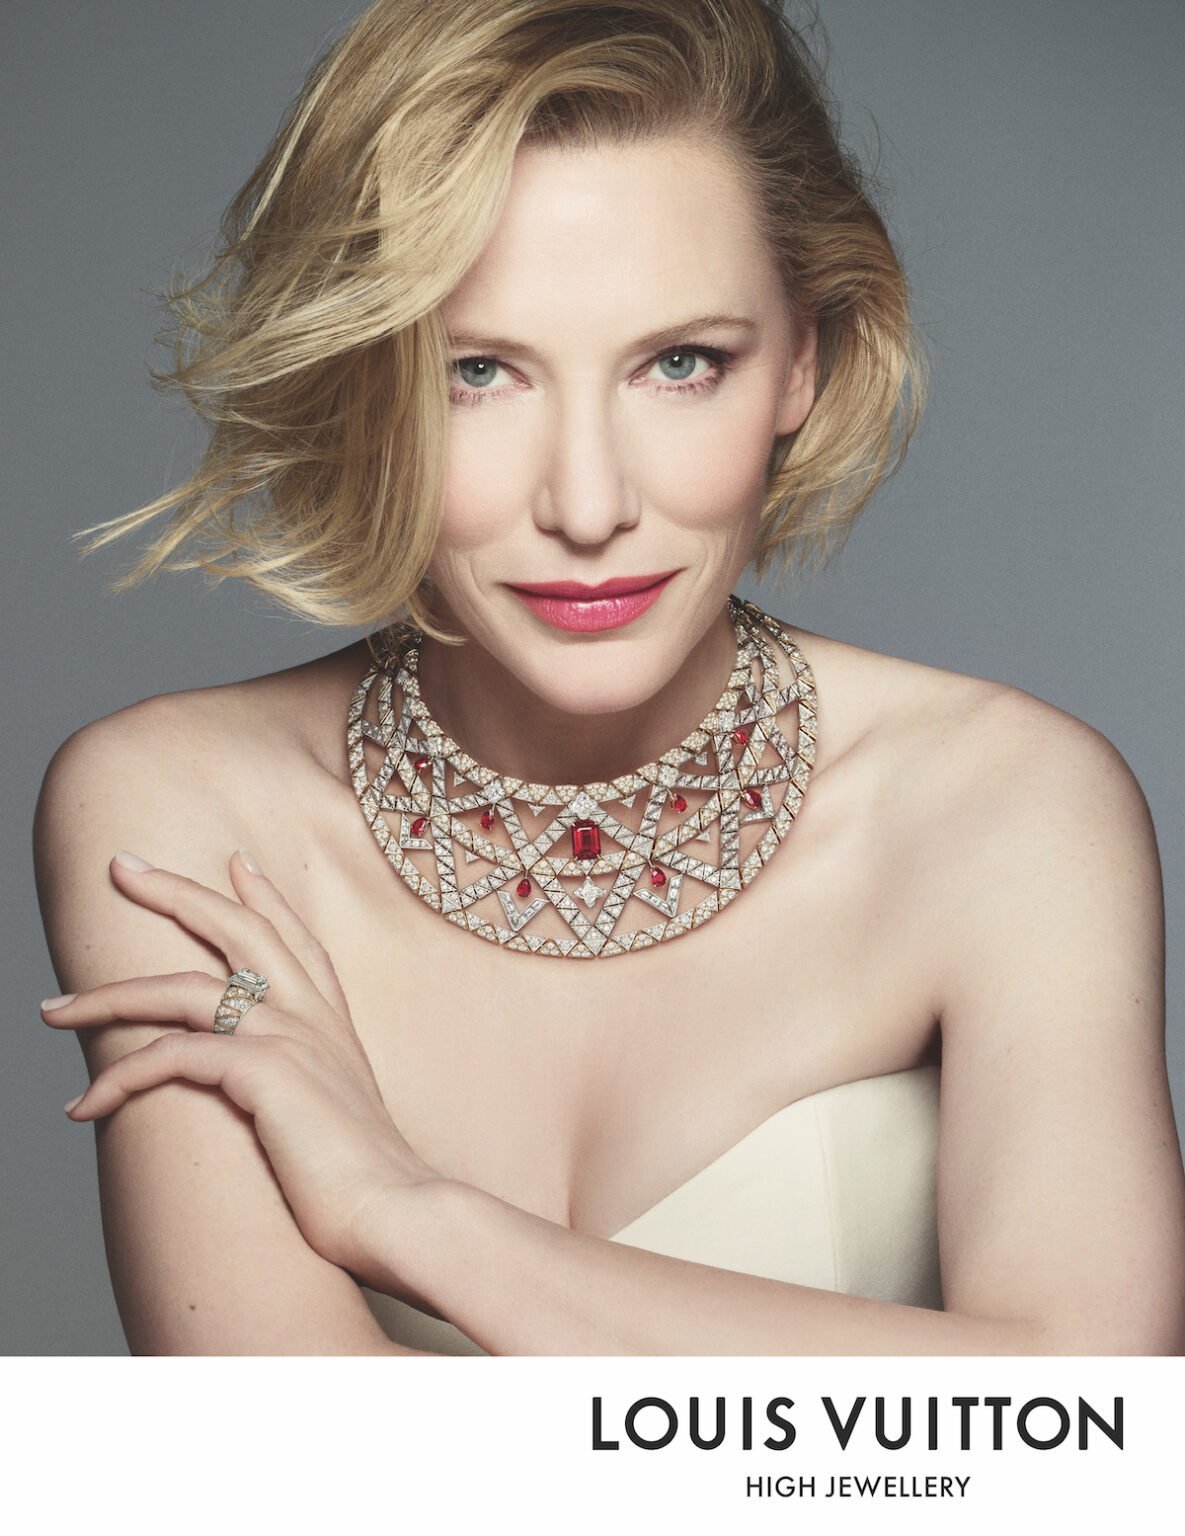 Louis Vuitton Taps Cate Blanchett for 'Spirit' High Jewelry Campaign – WWD